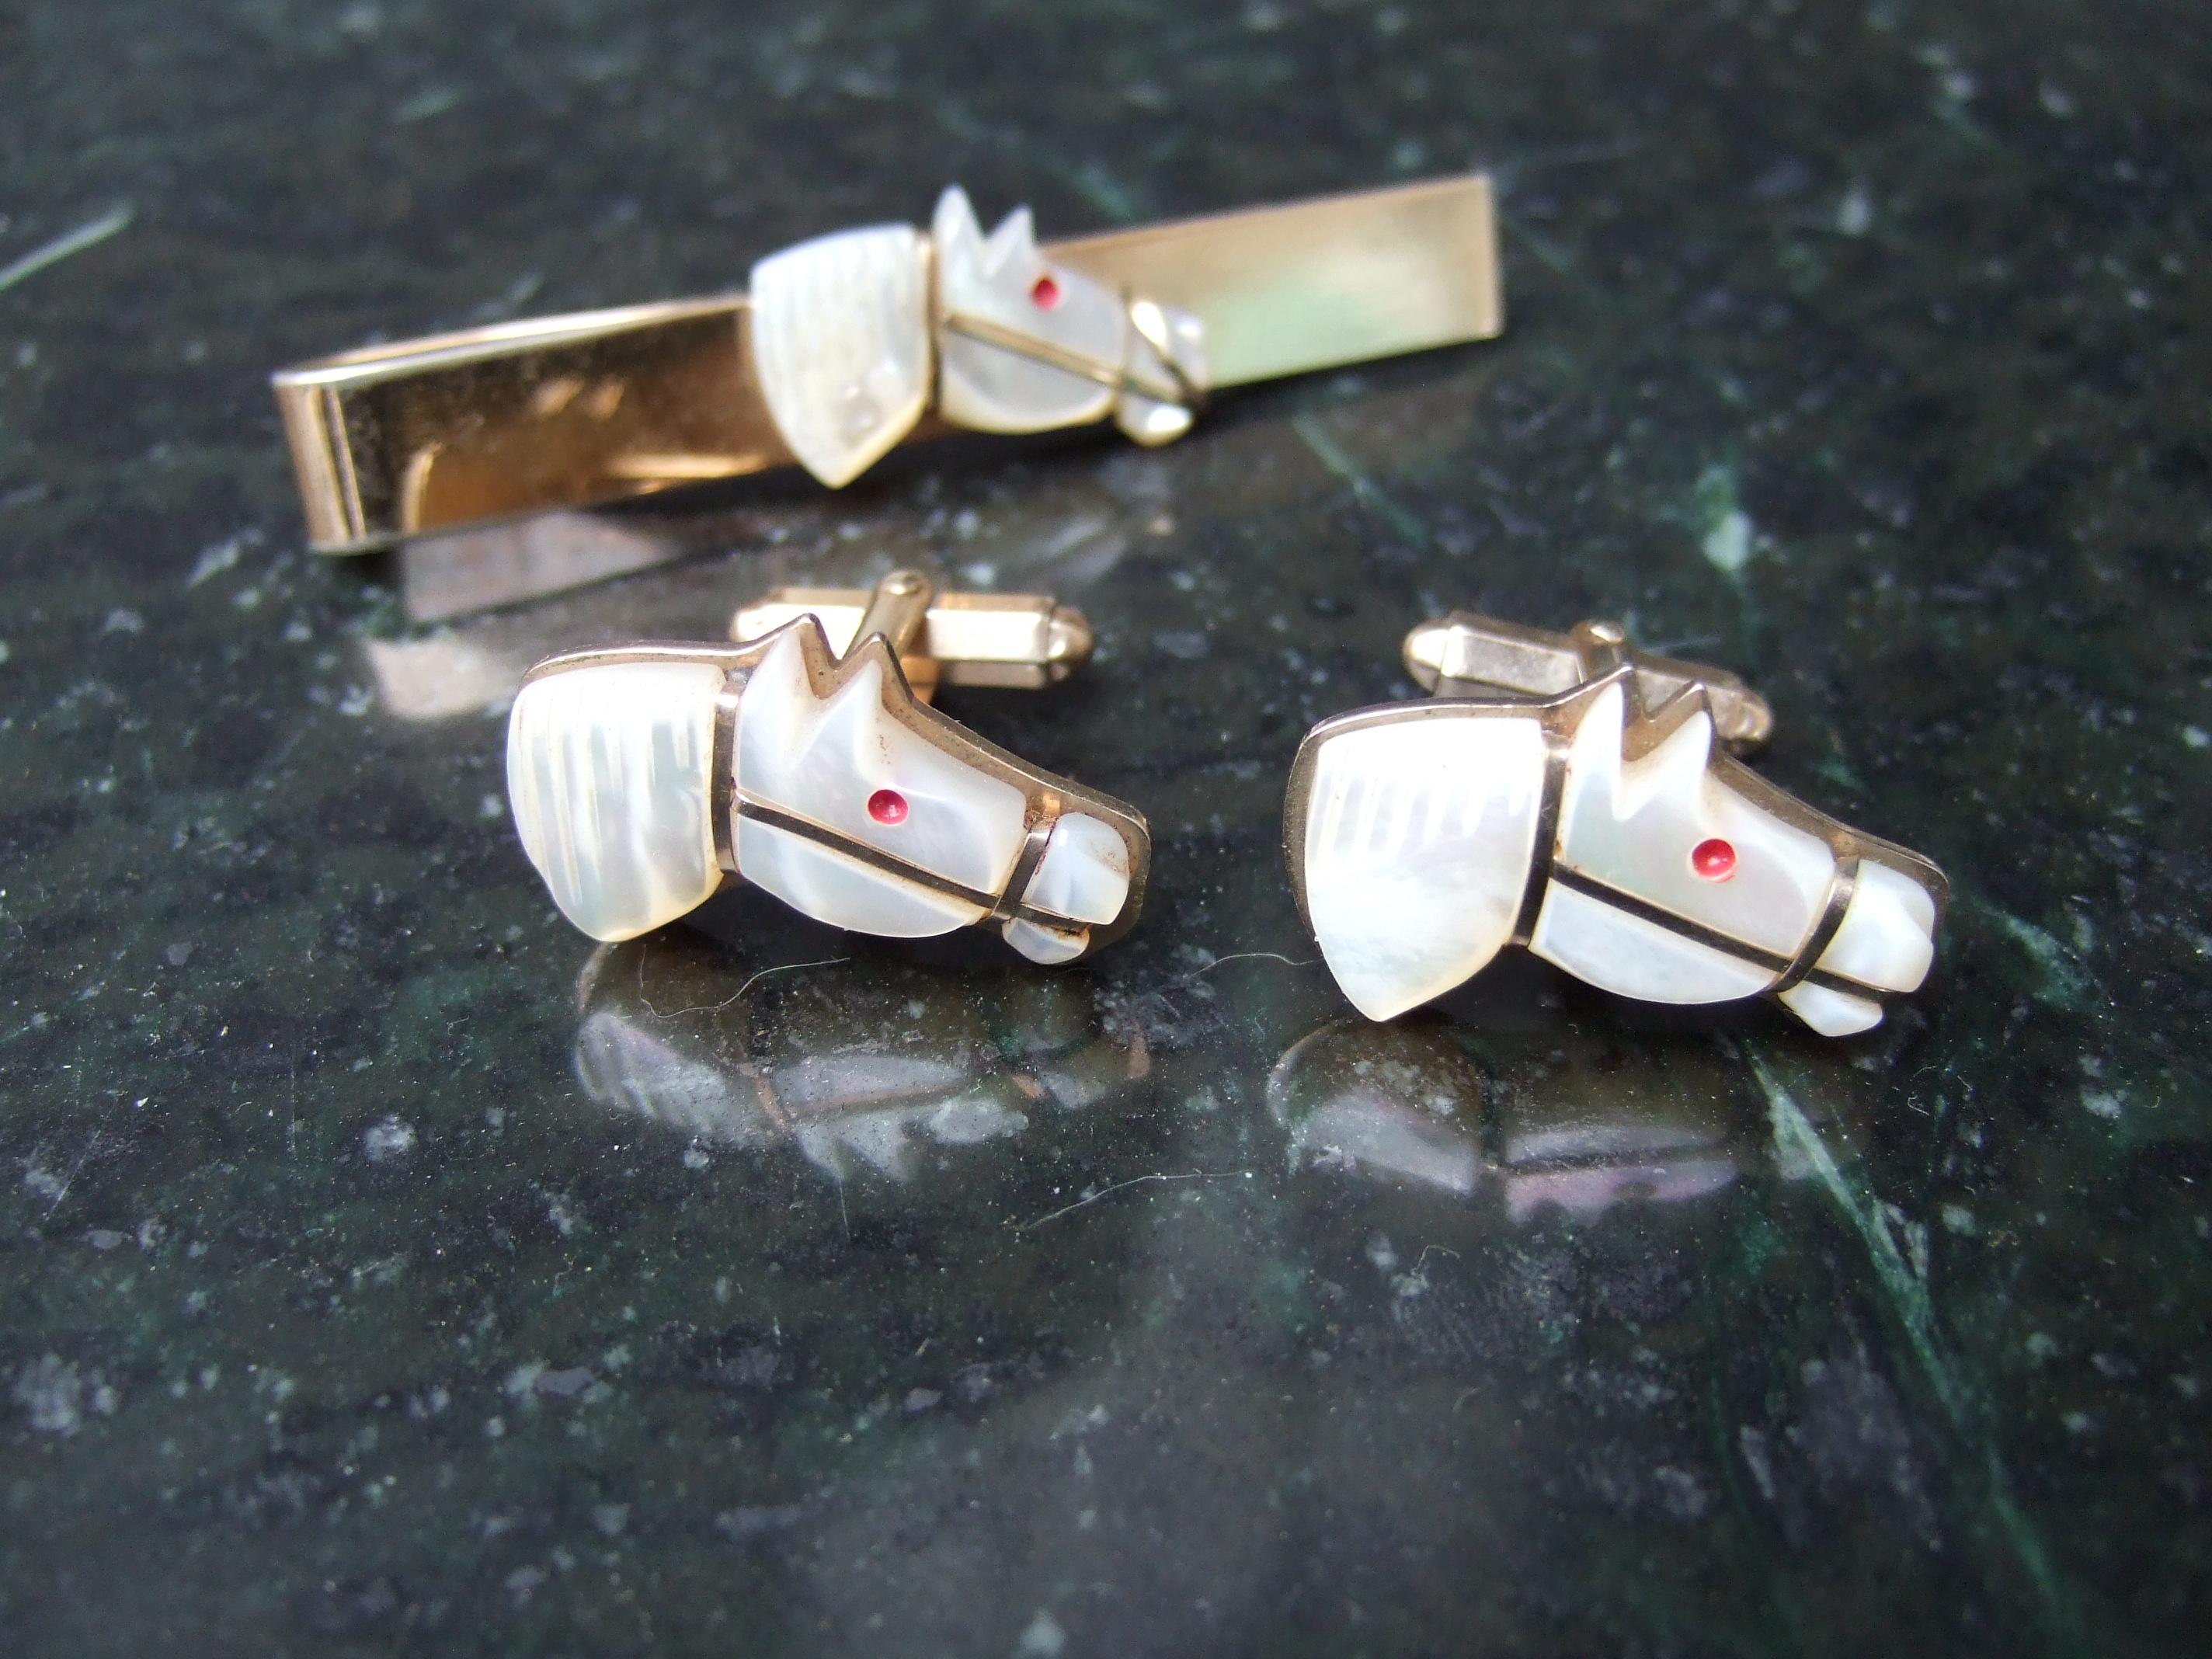 Hand carved mother of pearl equine cufflinks & tie bar set c 1950s
The unique set is designed with a trio of horse figures designed 
from mother of pearl shell

Designed with gilt metal bridals & red enamel eyes
Makes a very elegant accessory